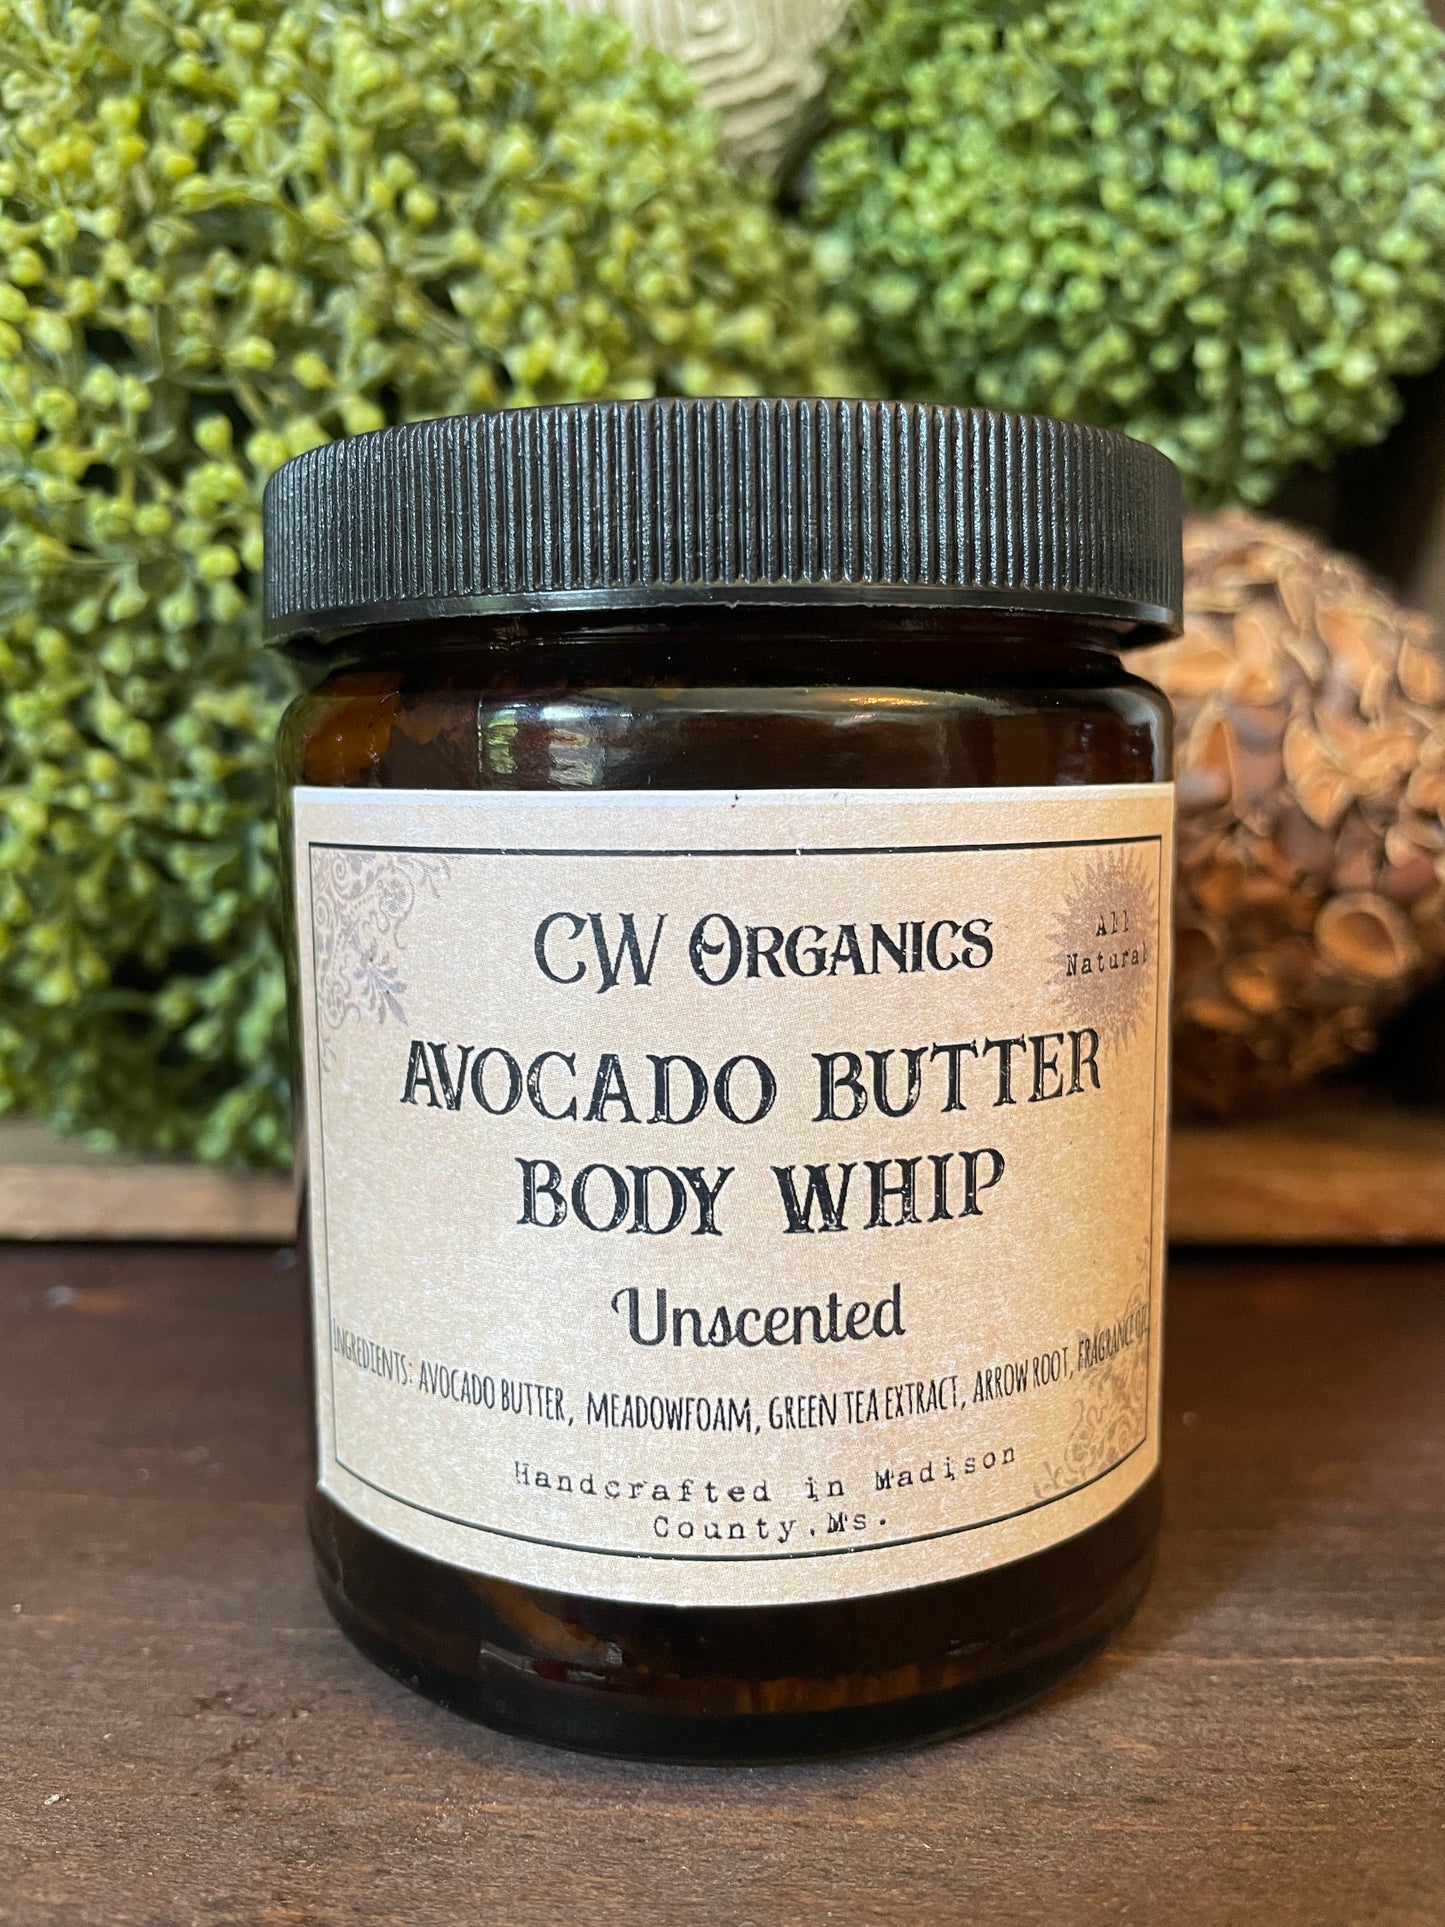 Avocado Butter Body Whip - Unscented